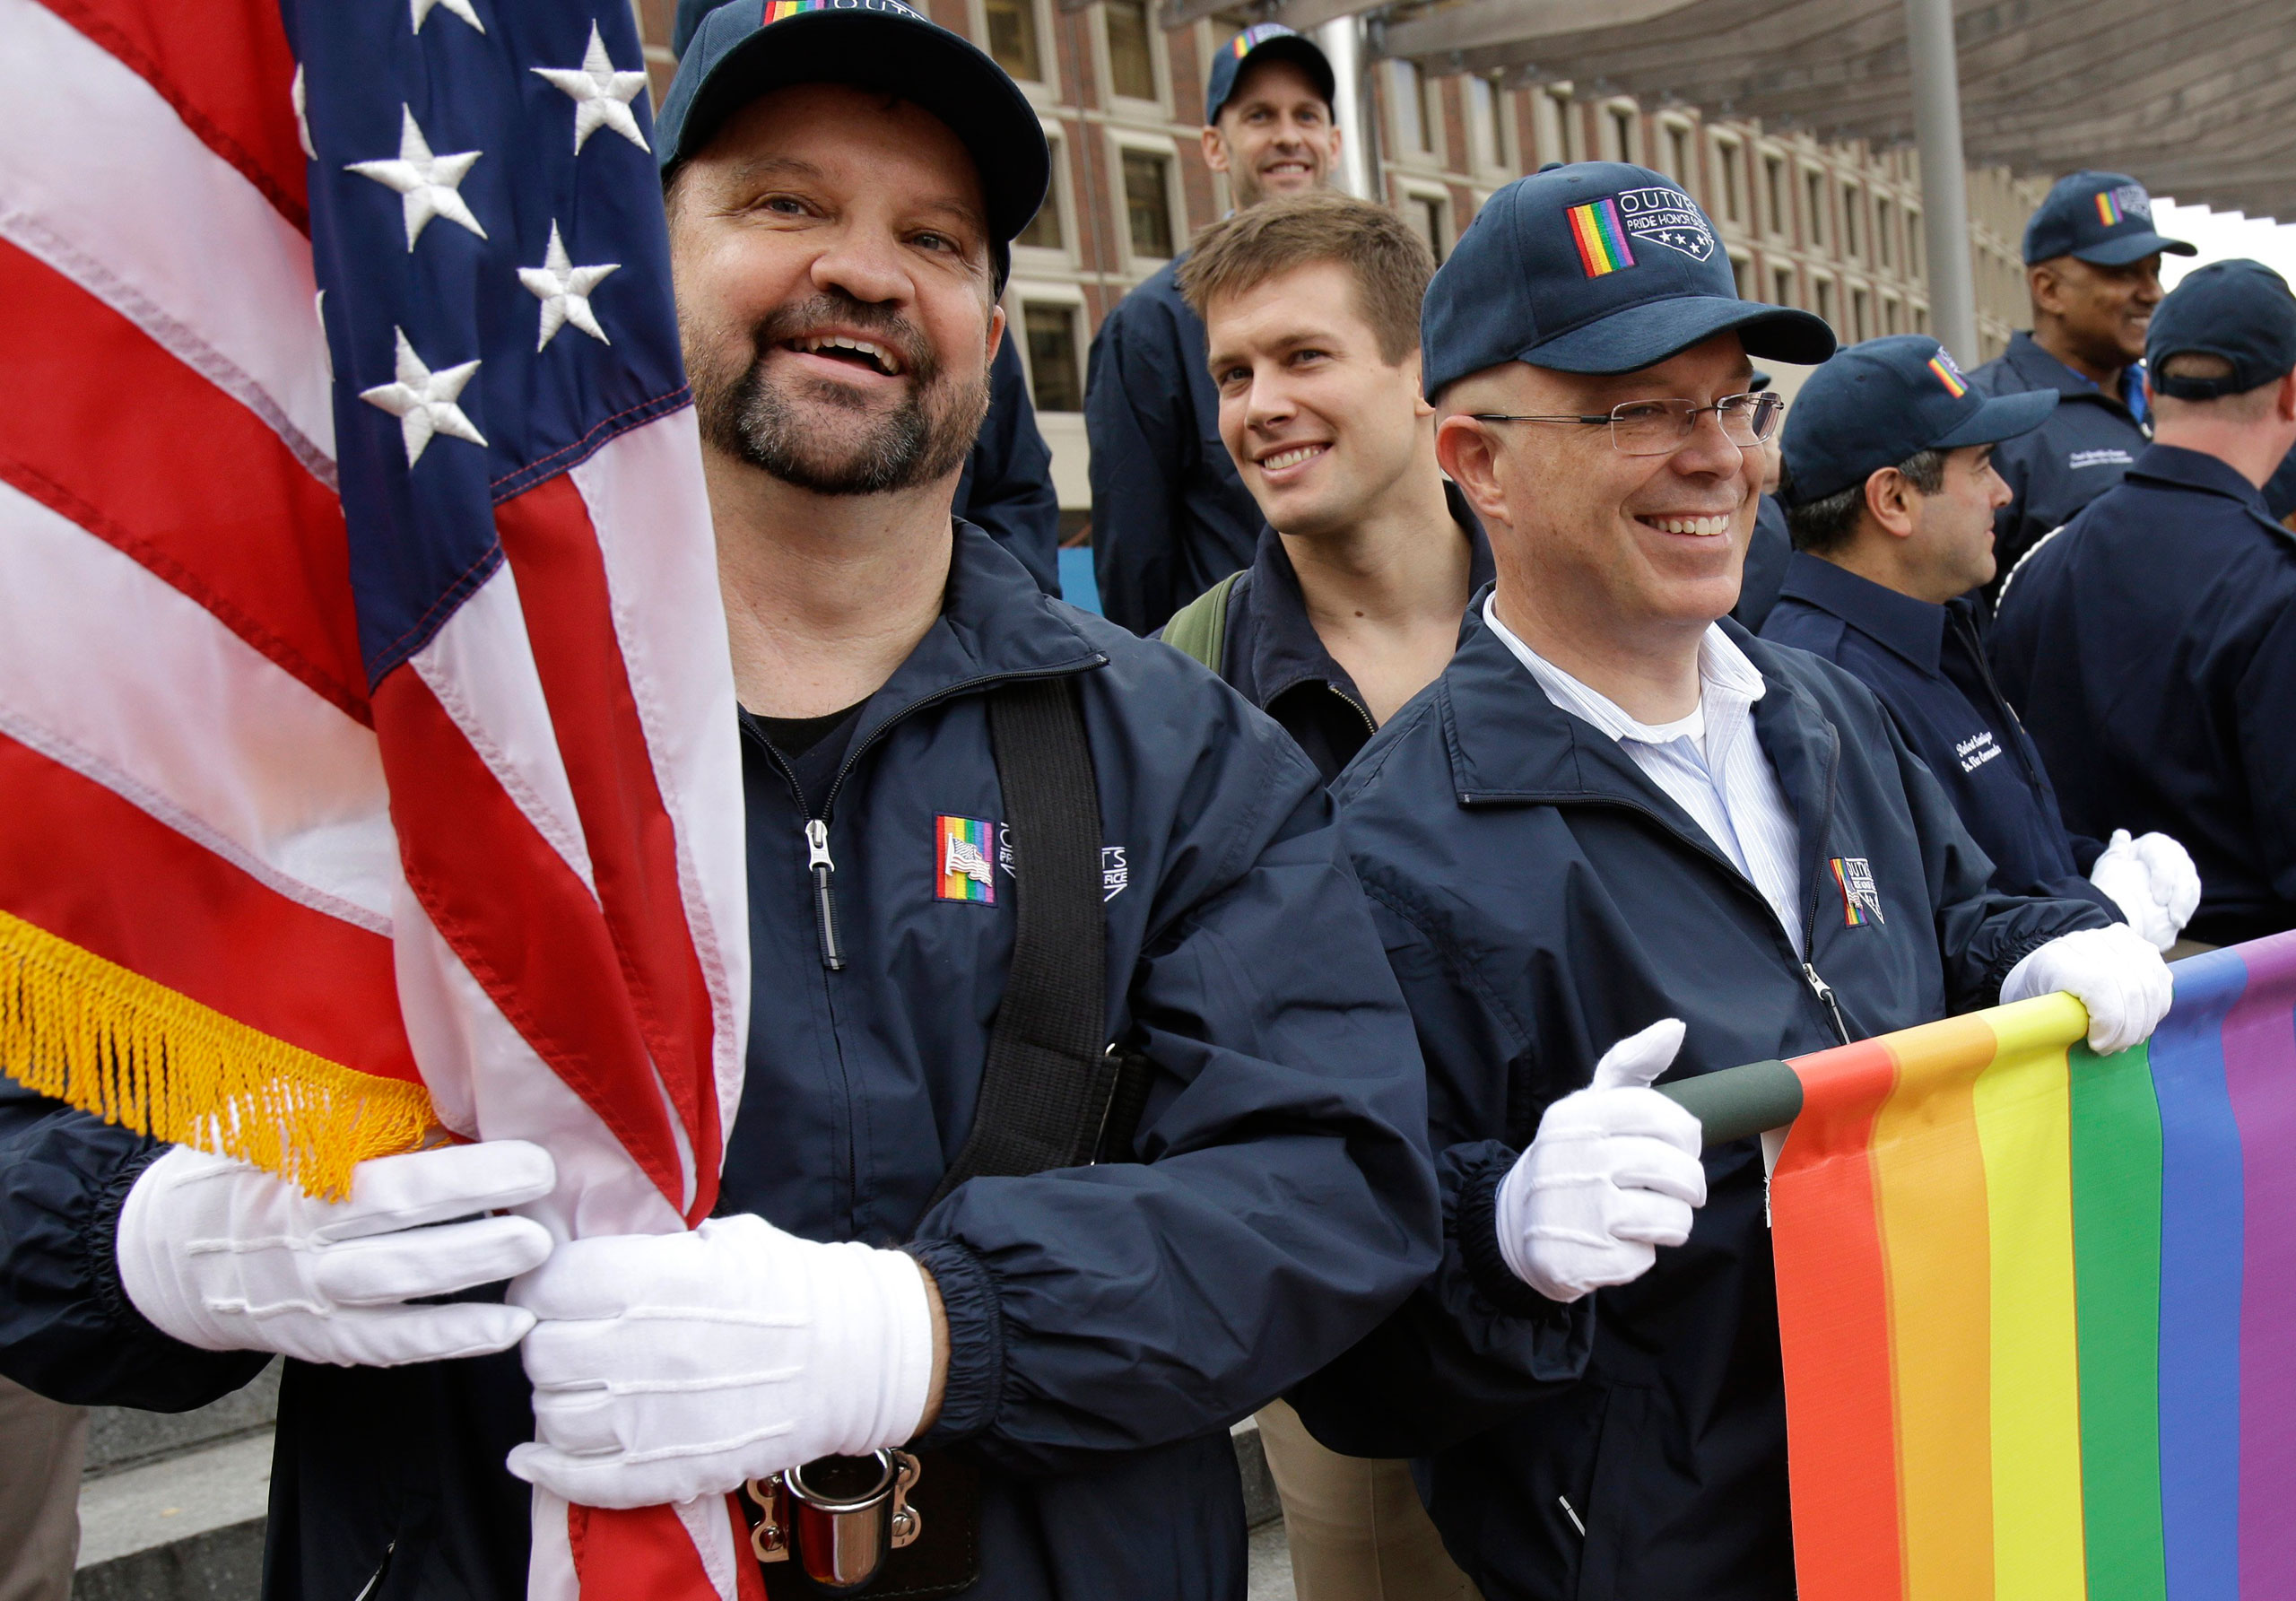 Retired U.S. Air Force Master Sgt. Eric Bullen, of Westborough, Mass., left, holds an American flag as U.S. Army veteran Ian Ryan, of Dennis, Mass., front right, rolls up an OutVets banner after marching with a group representing LGBT military veterans in a Veterans Day parade in Boston, Nov. 11, 2014. The organizers of Boston's annual St. Patrick's Day parade voted to allow the group of gay veterans along with a second group, Boston Pride, to march in this year's parade. (Steven Senne—AP)